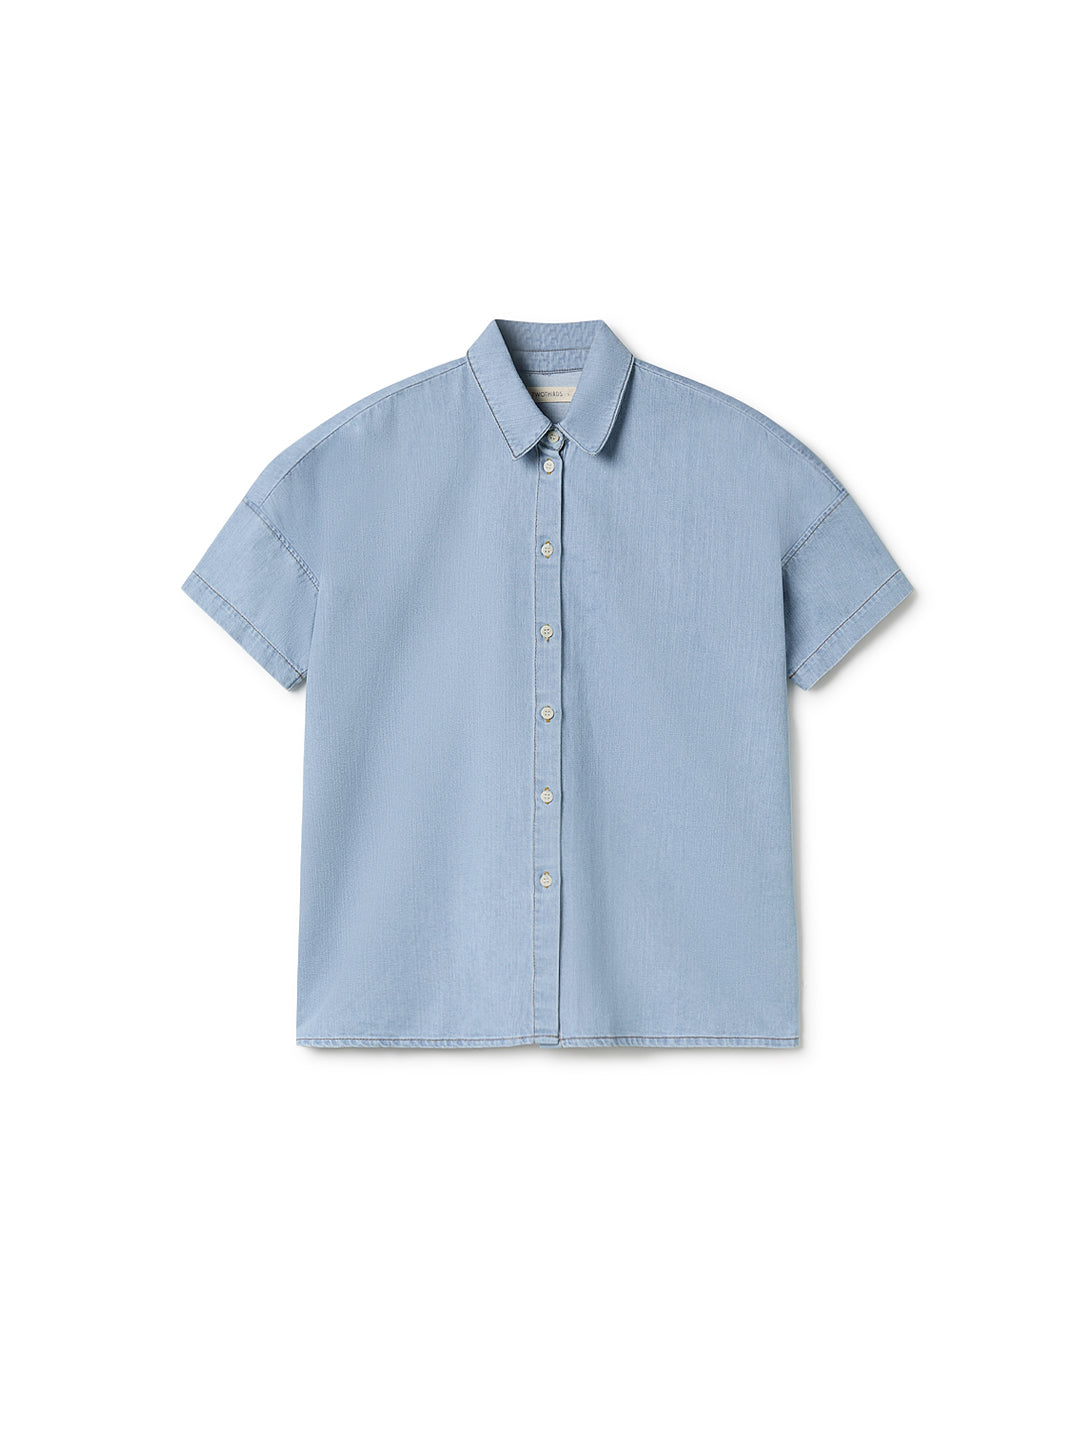 Paradise - Sky Blue | Fair Fashion by TWOTHIRDS